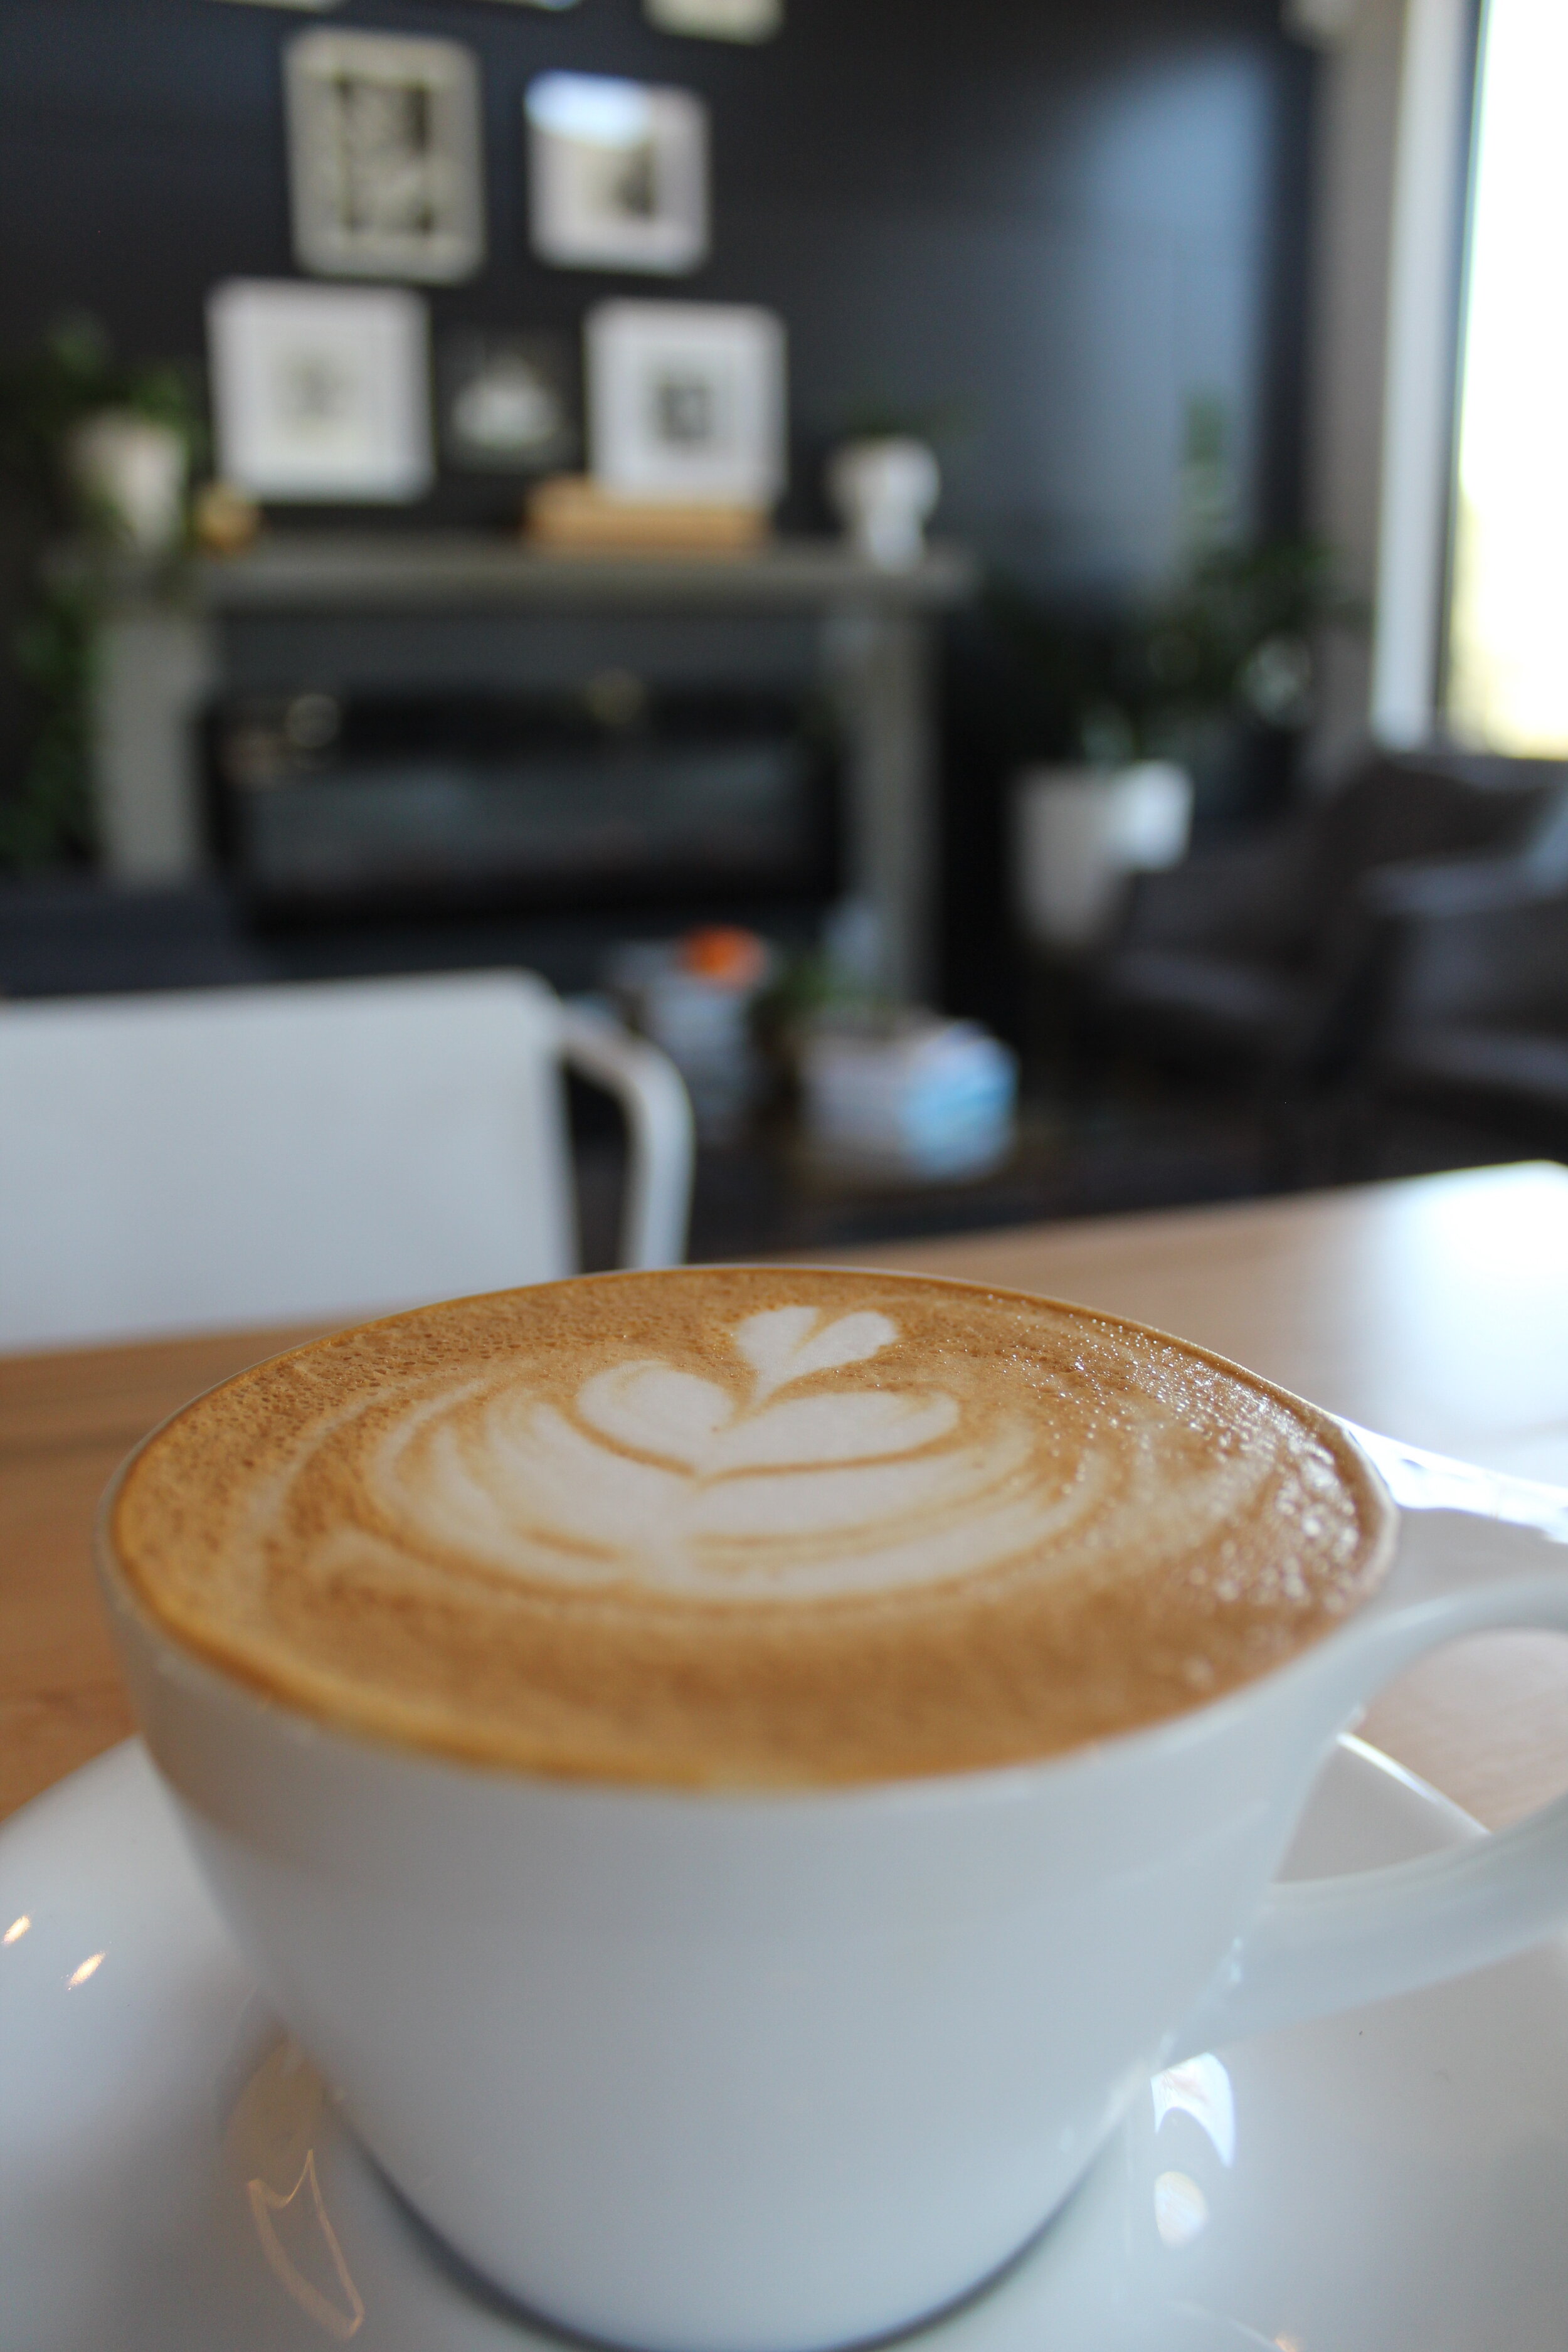 Be sure to check out Scandi Tiny to cure your next cappuccino craving.